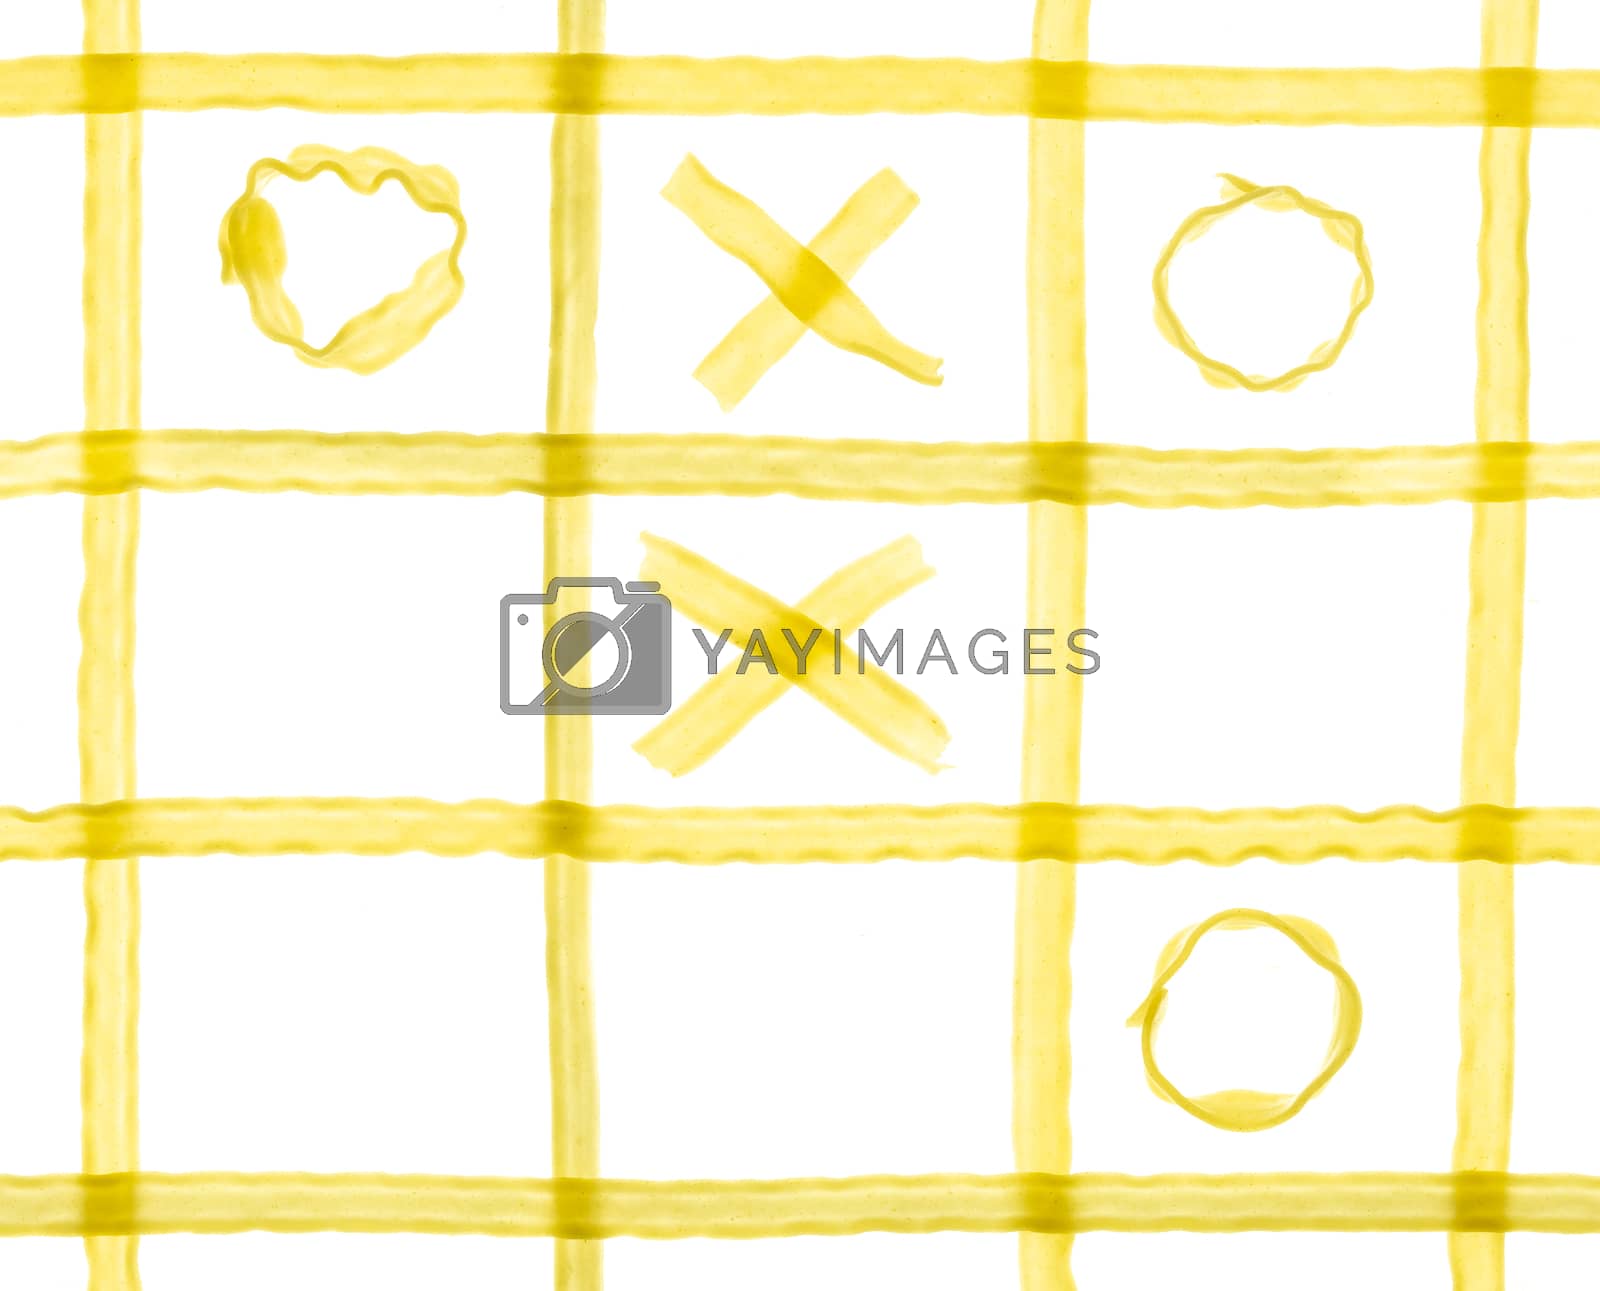 Royalty free image of Pasta tic tac toe game on the white background by sashokddt